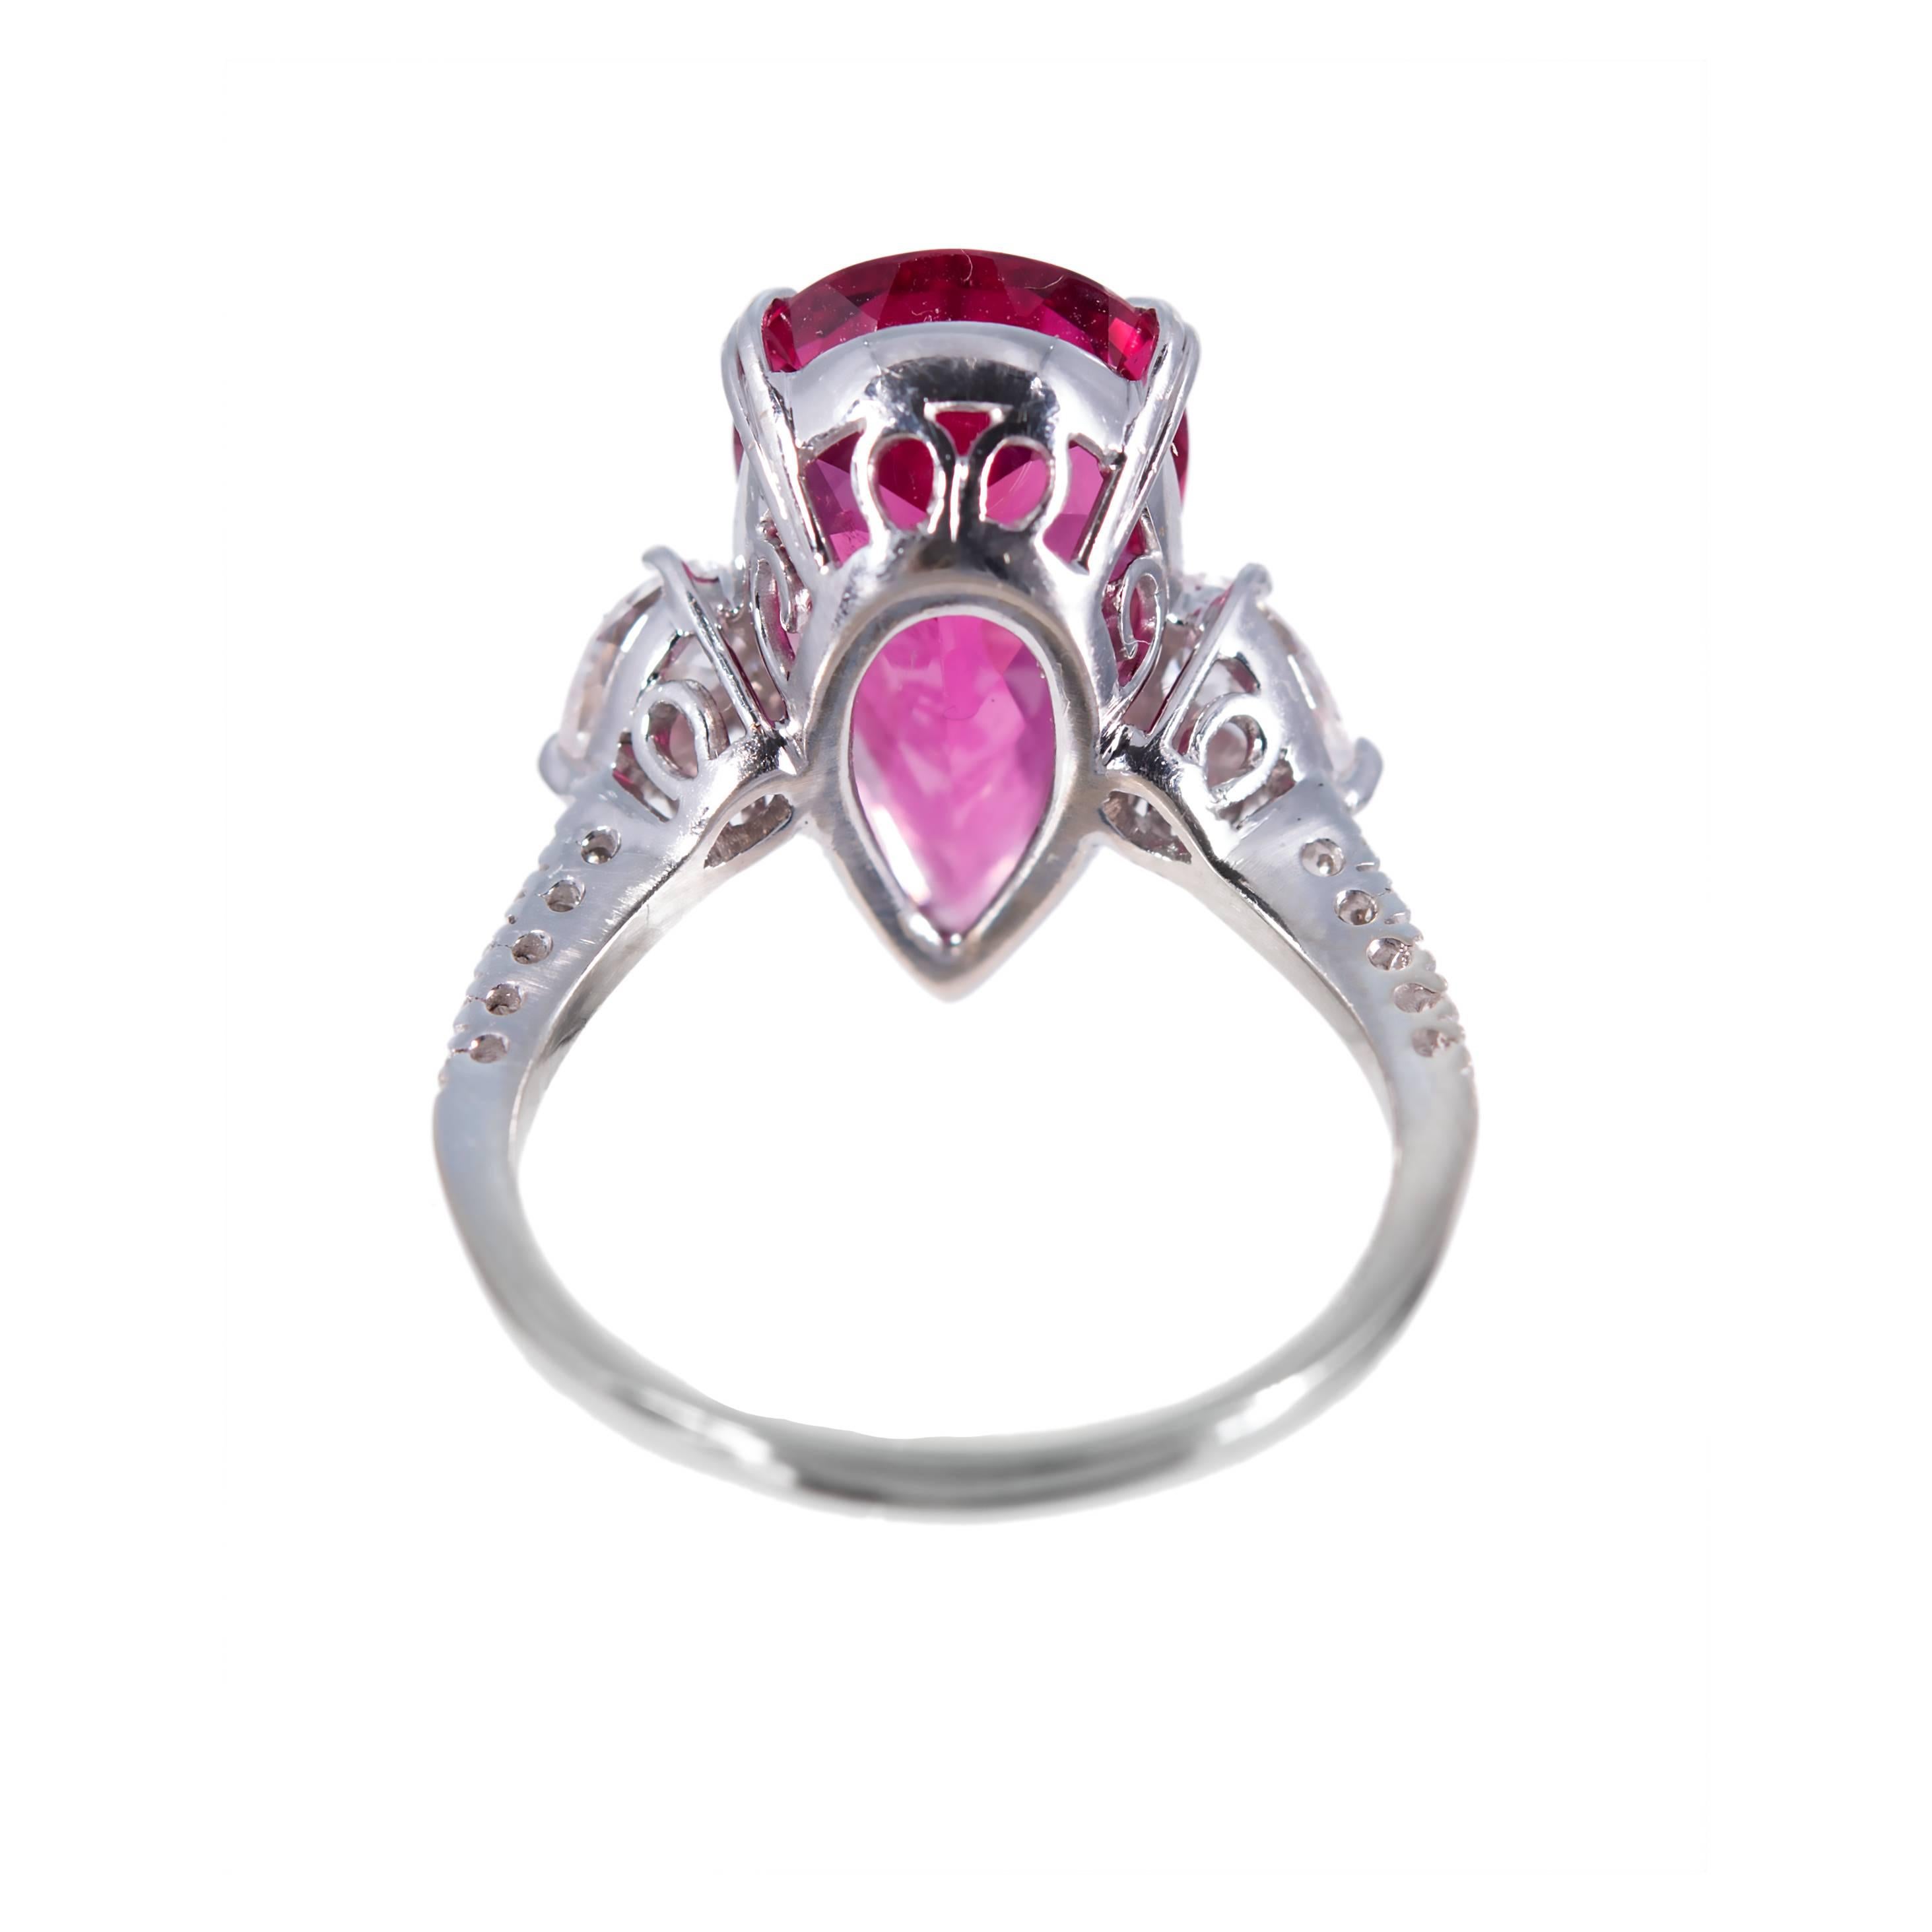 6.55 Carat Pear Rubelite Pink Tourmaline Diamond Gold Cocktail Ring In Good Condition For Sale In Stamford, CT